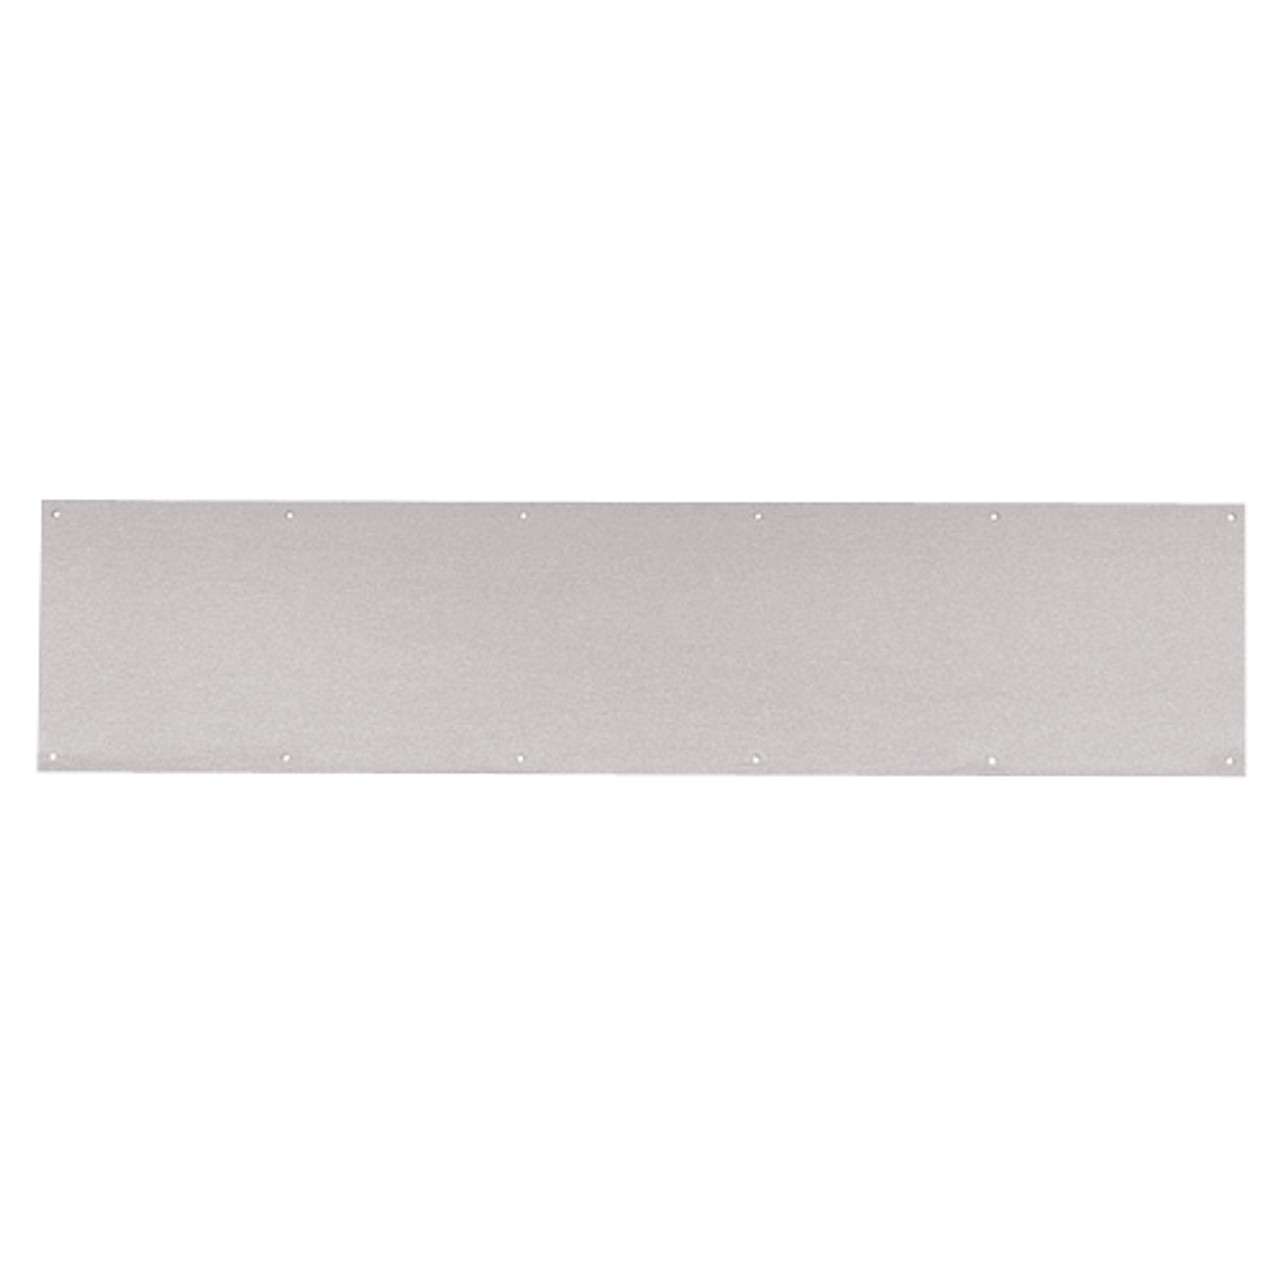 8400-US32D-30x47-B-CS Ives 8400 Series Protection Plate in Satin Stainless Steel